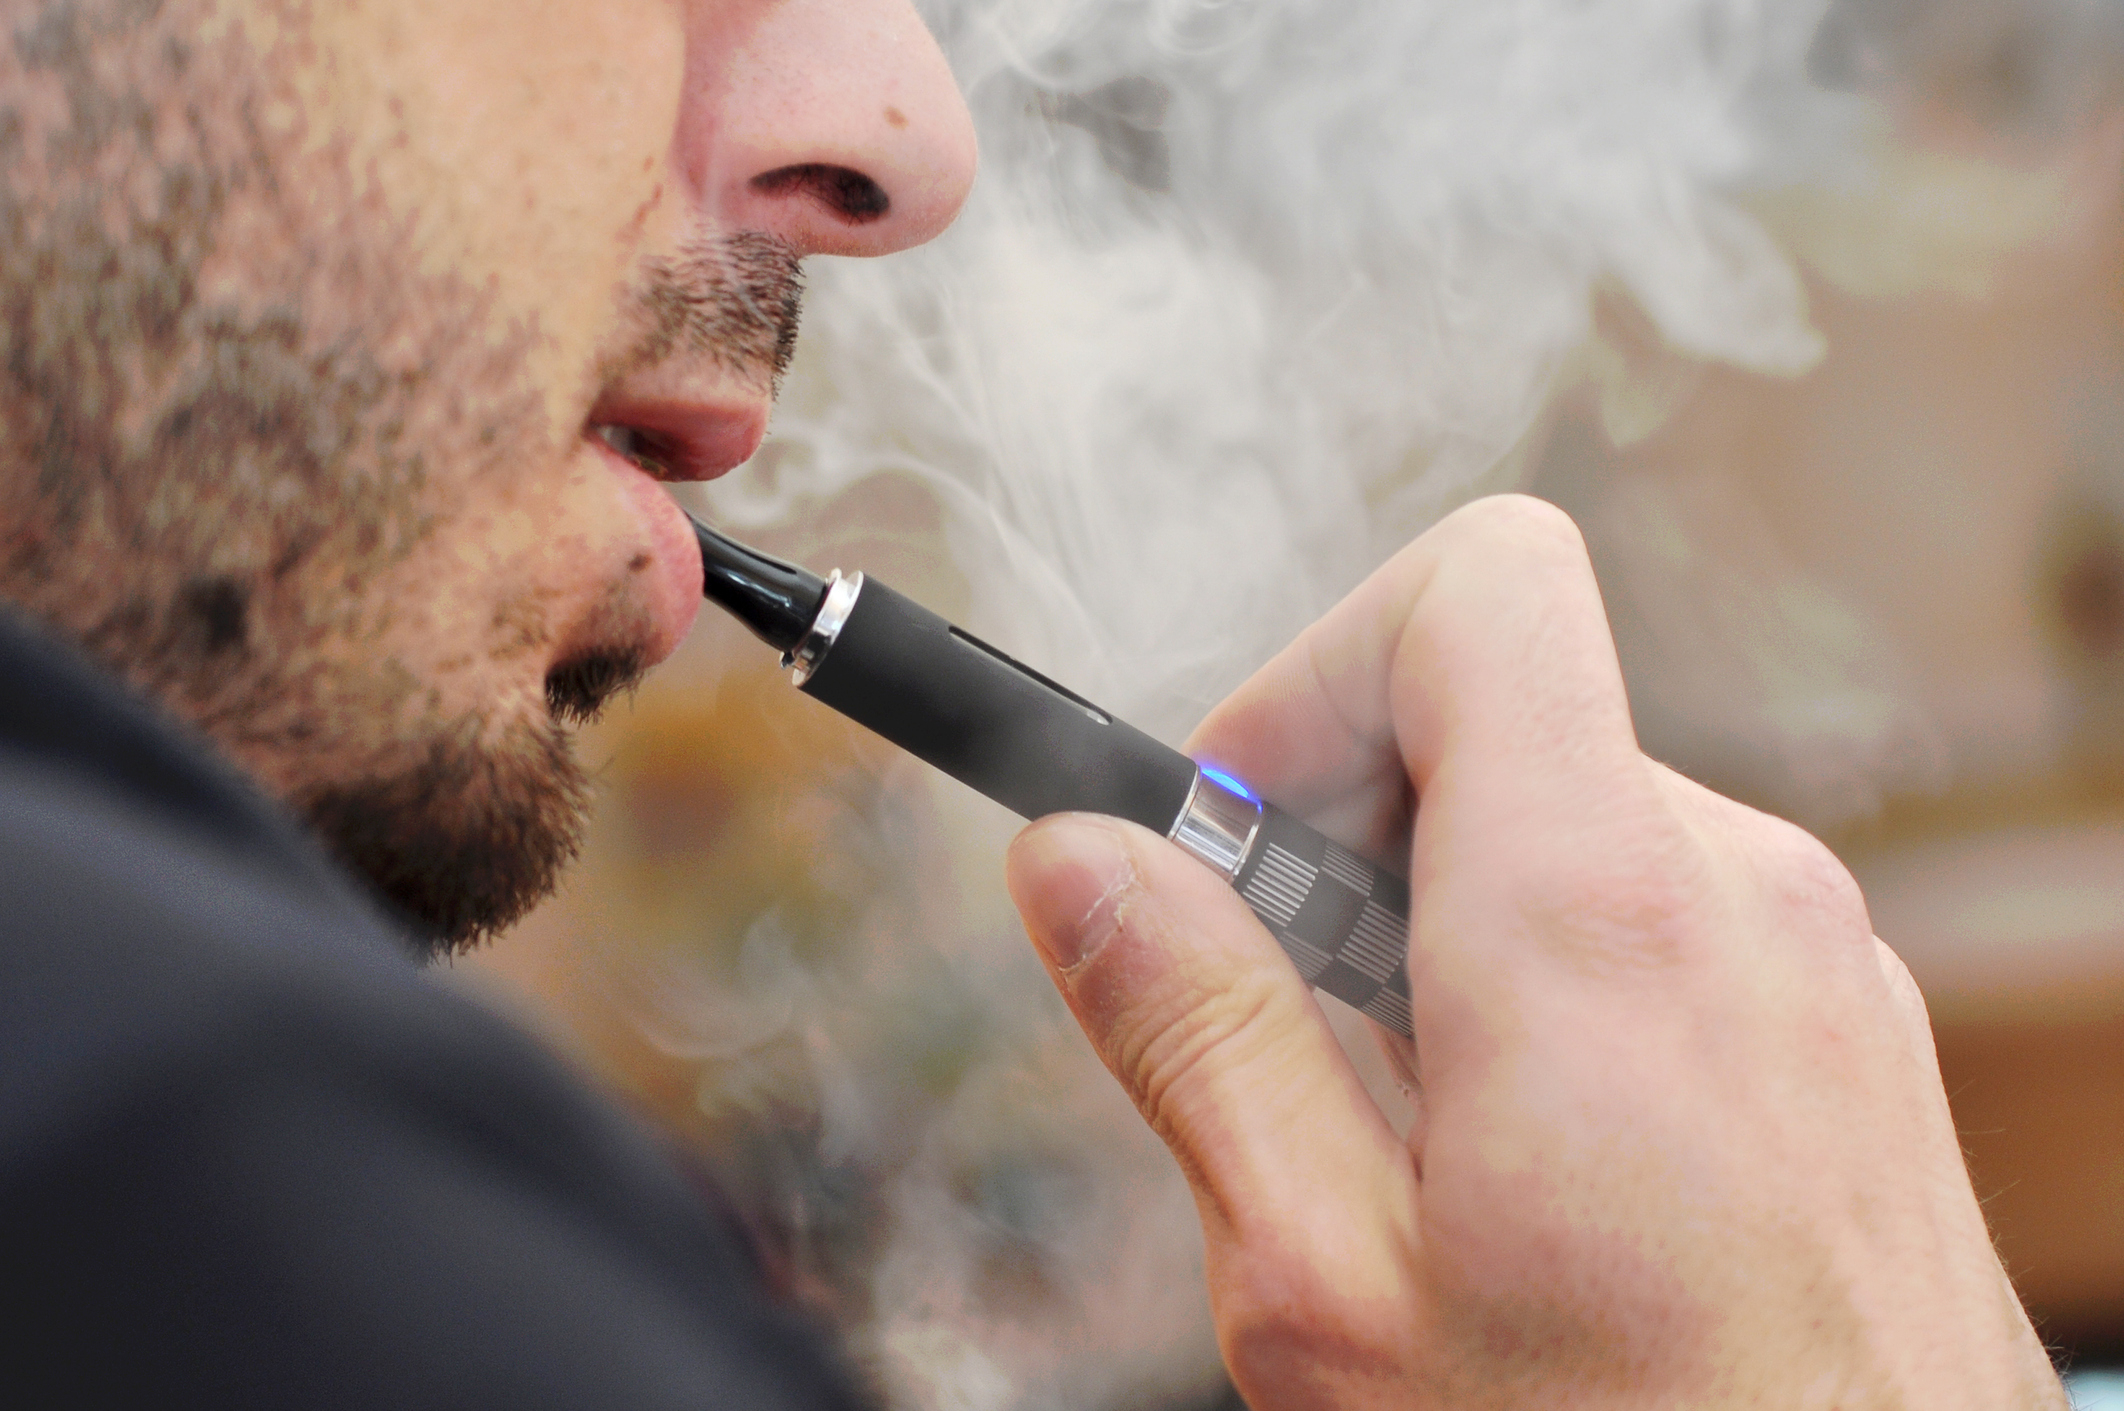 Person using an electronic cigarette, with visible vapor